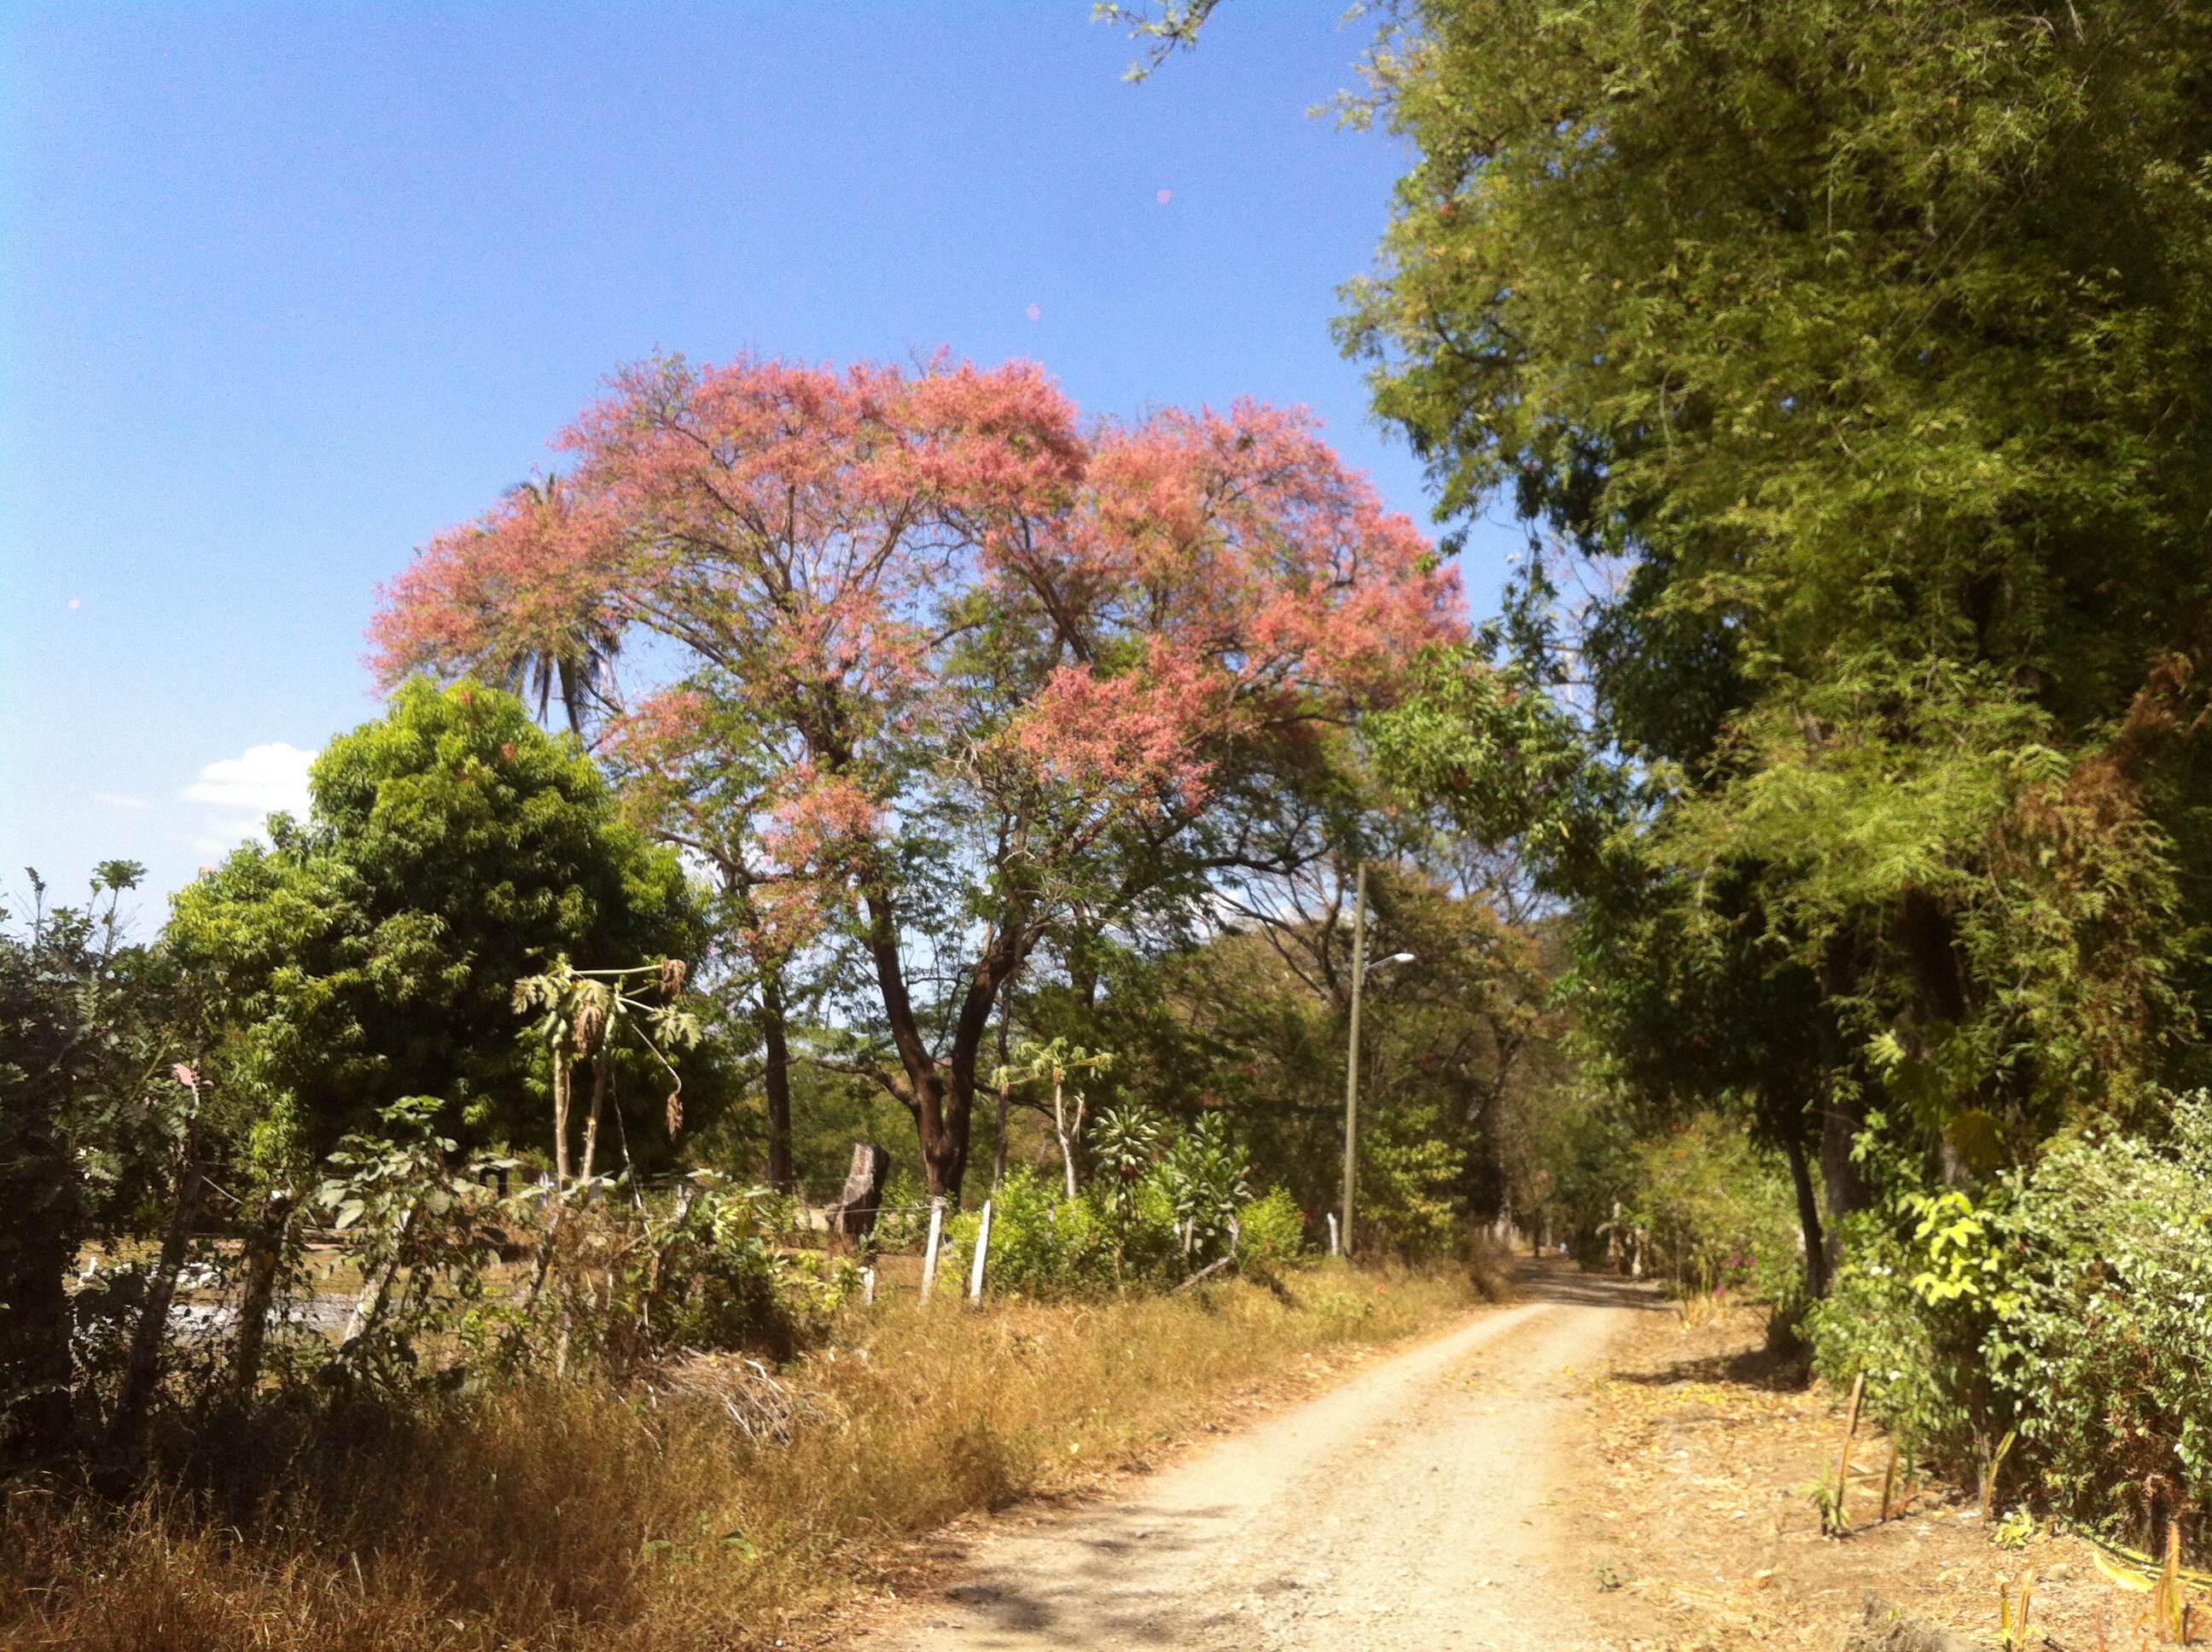 Carao tree in full bloom, late in summer